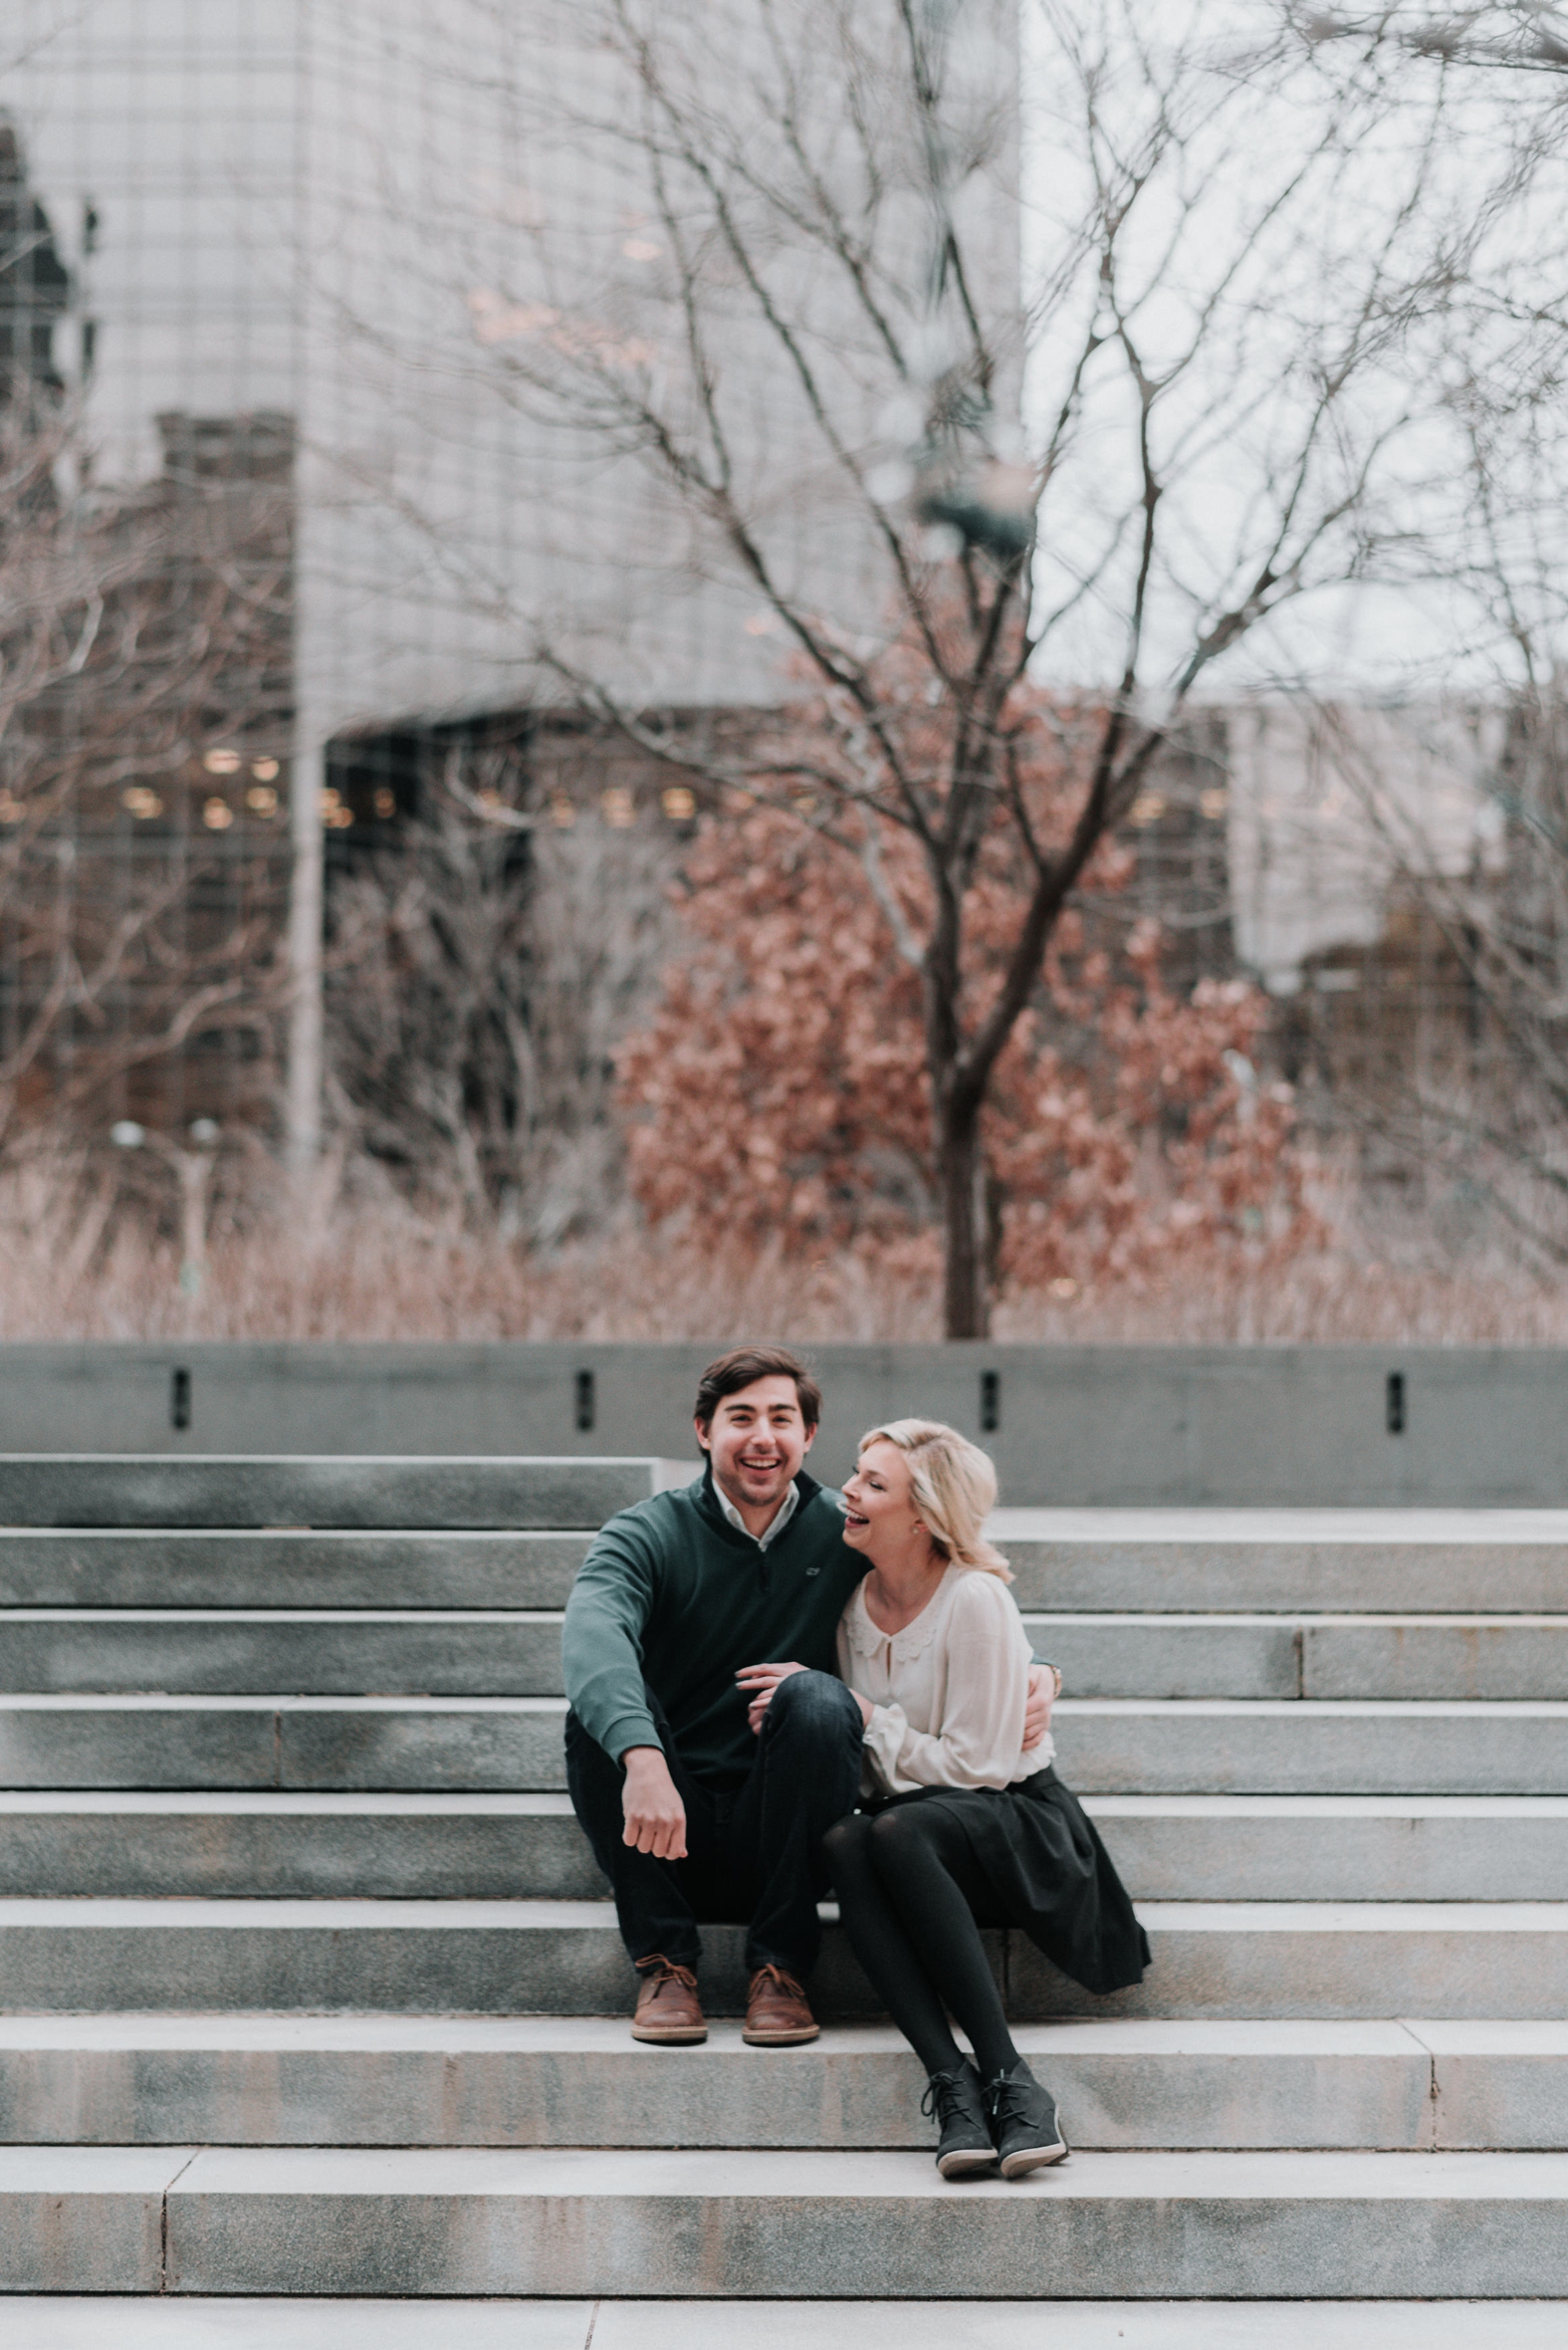 Bride and groom hug close and laugh on steps in downtown St. Louis during their winter engagement photo session.